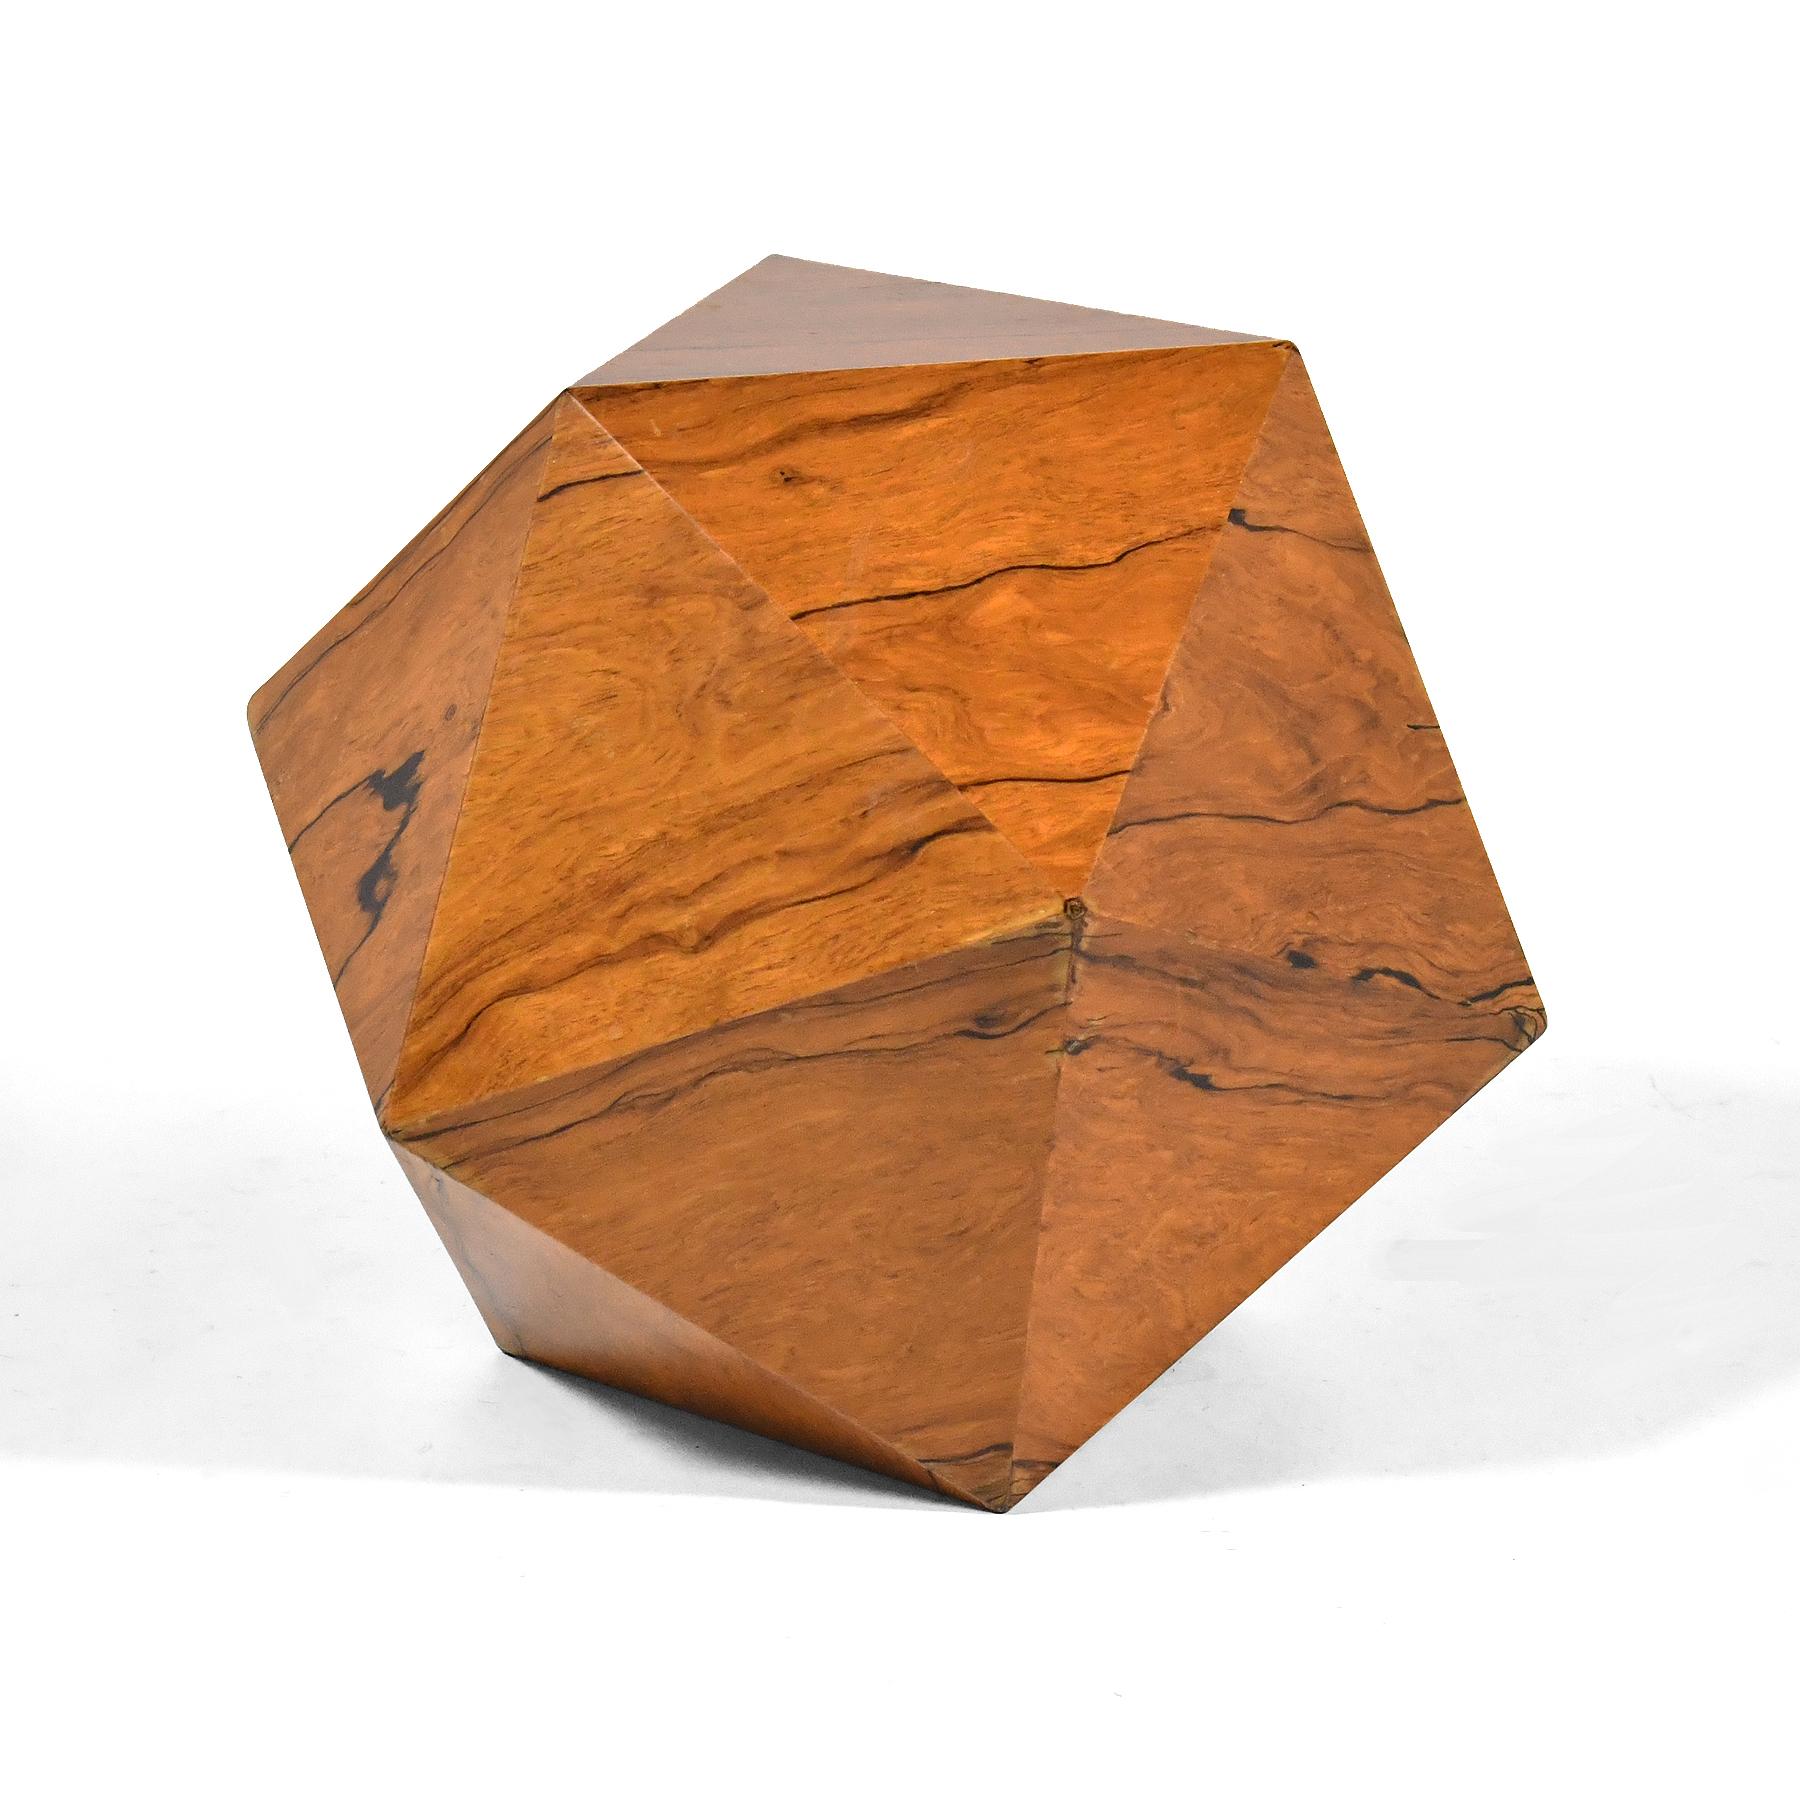 A stunning geometric form clad in rich rosewood, this deltahedron-shaped side table has a lovely small scale, sculptural presence, and serves perfectly as a drinks table.

Measures: 15